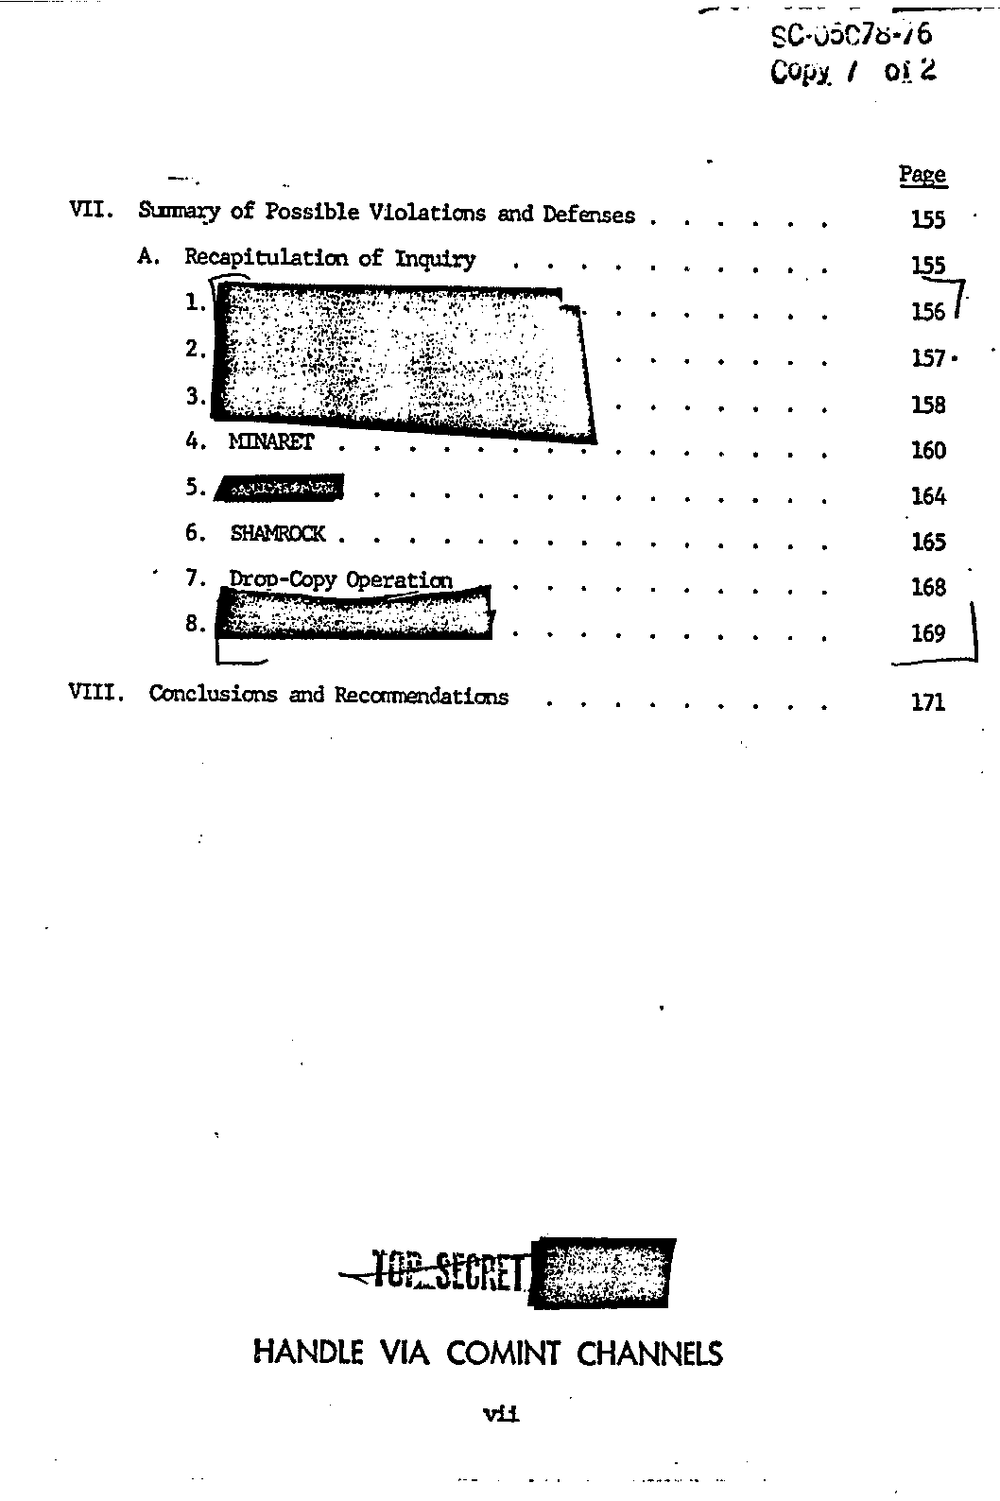 Page 8 from Report on Inquiry Into CIA Related Electronic Surveillance Activities